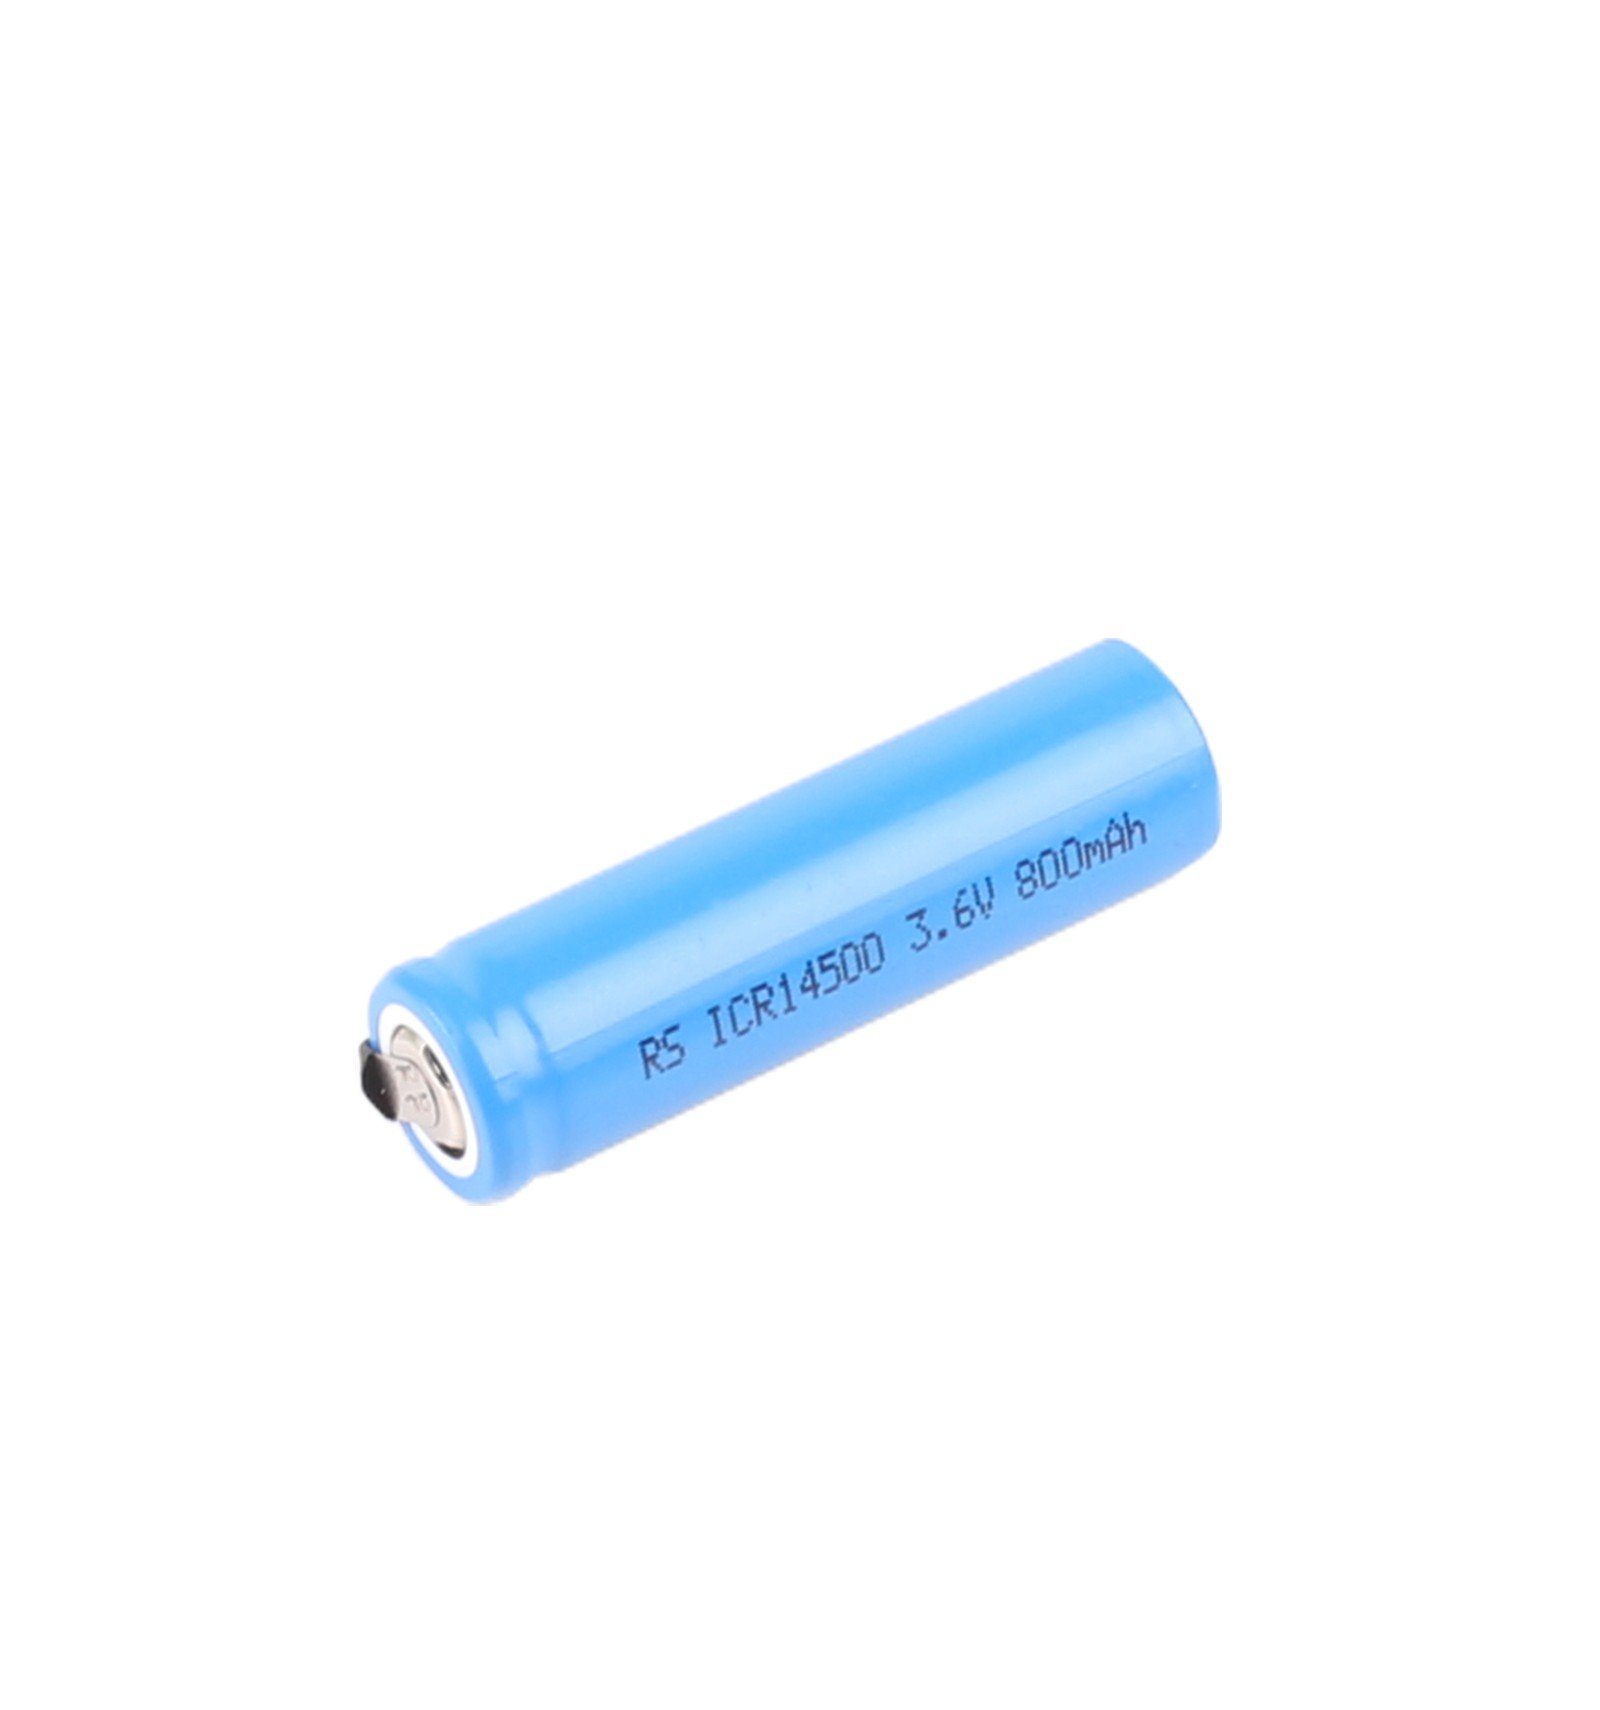 12V4500MAH: Jameco ReliaPro : Lithium Ion Rechargeable Battery